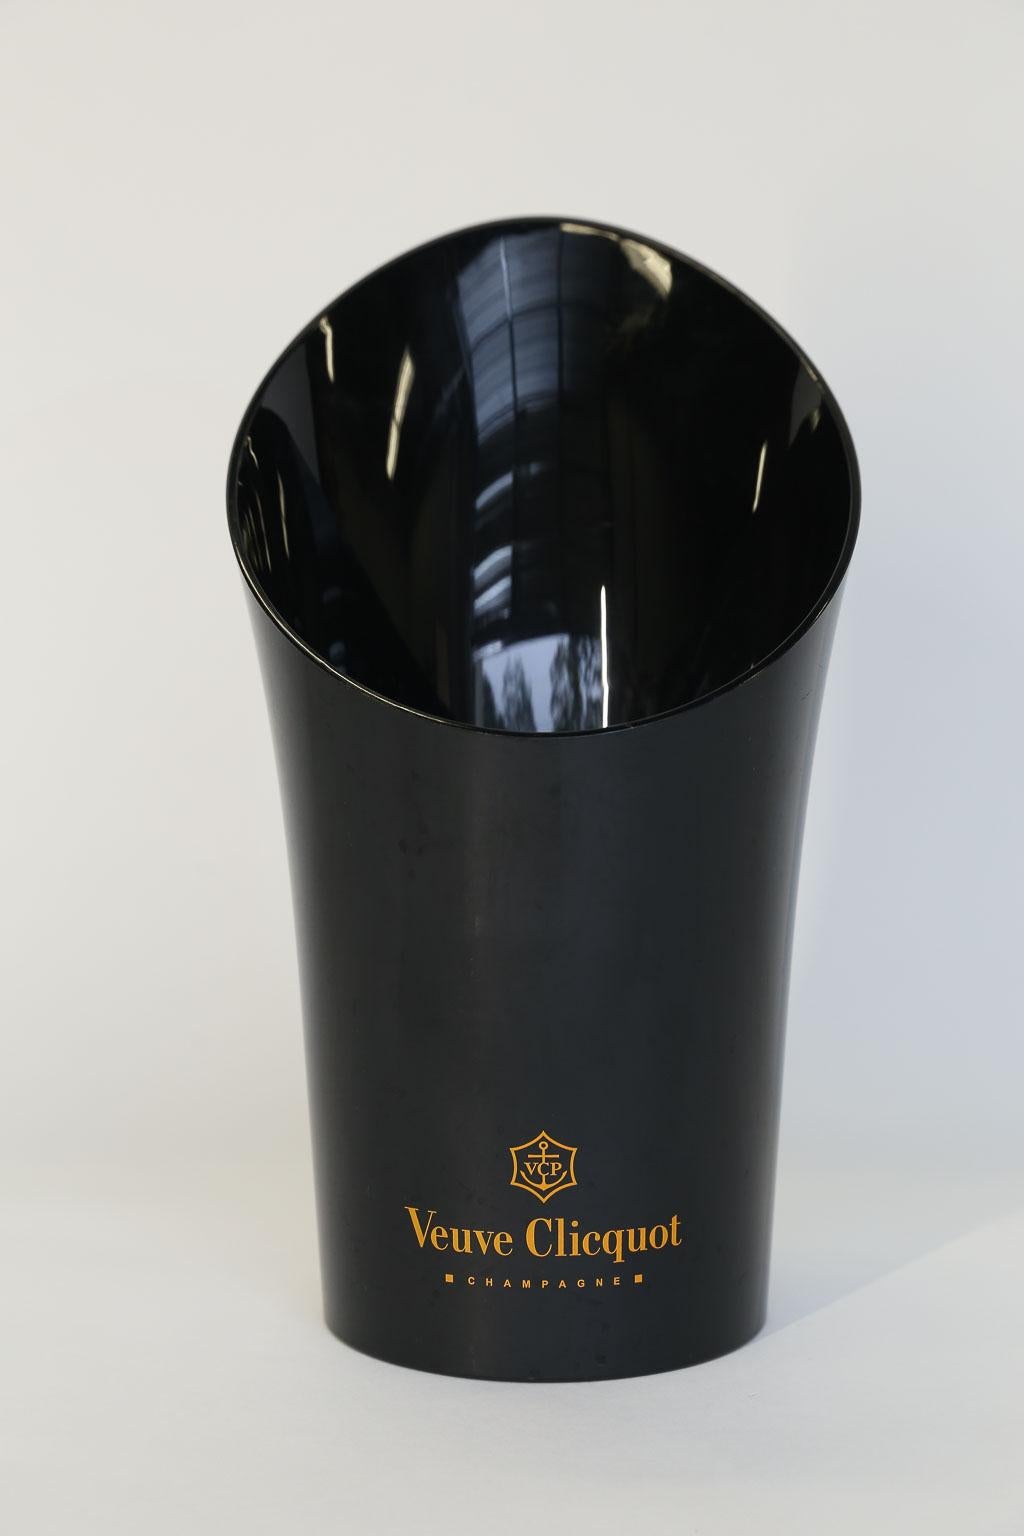 Made by the House of Veuve Clicquot for cooling champagne at outdoor celebrations, this black acrylic wine cooler is decorated with Veuve Clicquot's insignia on the front and an engraved logo on the back. The sleek black color and shape make this a